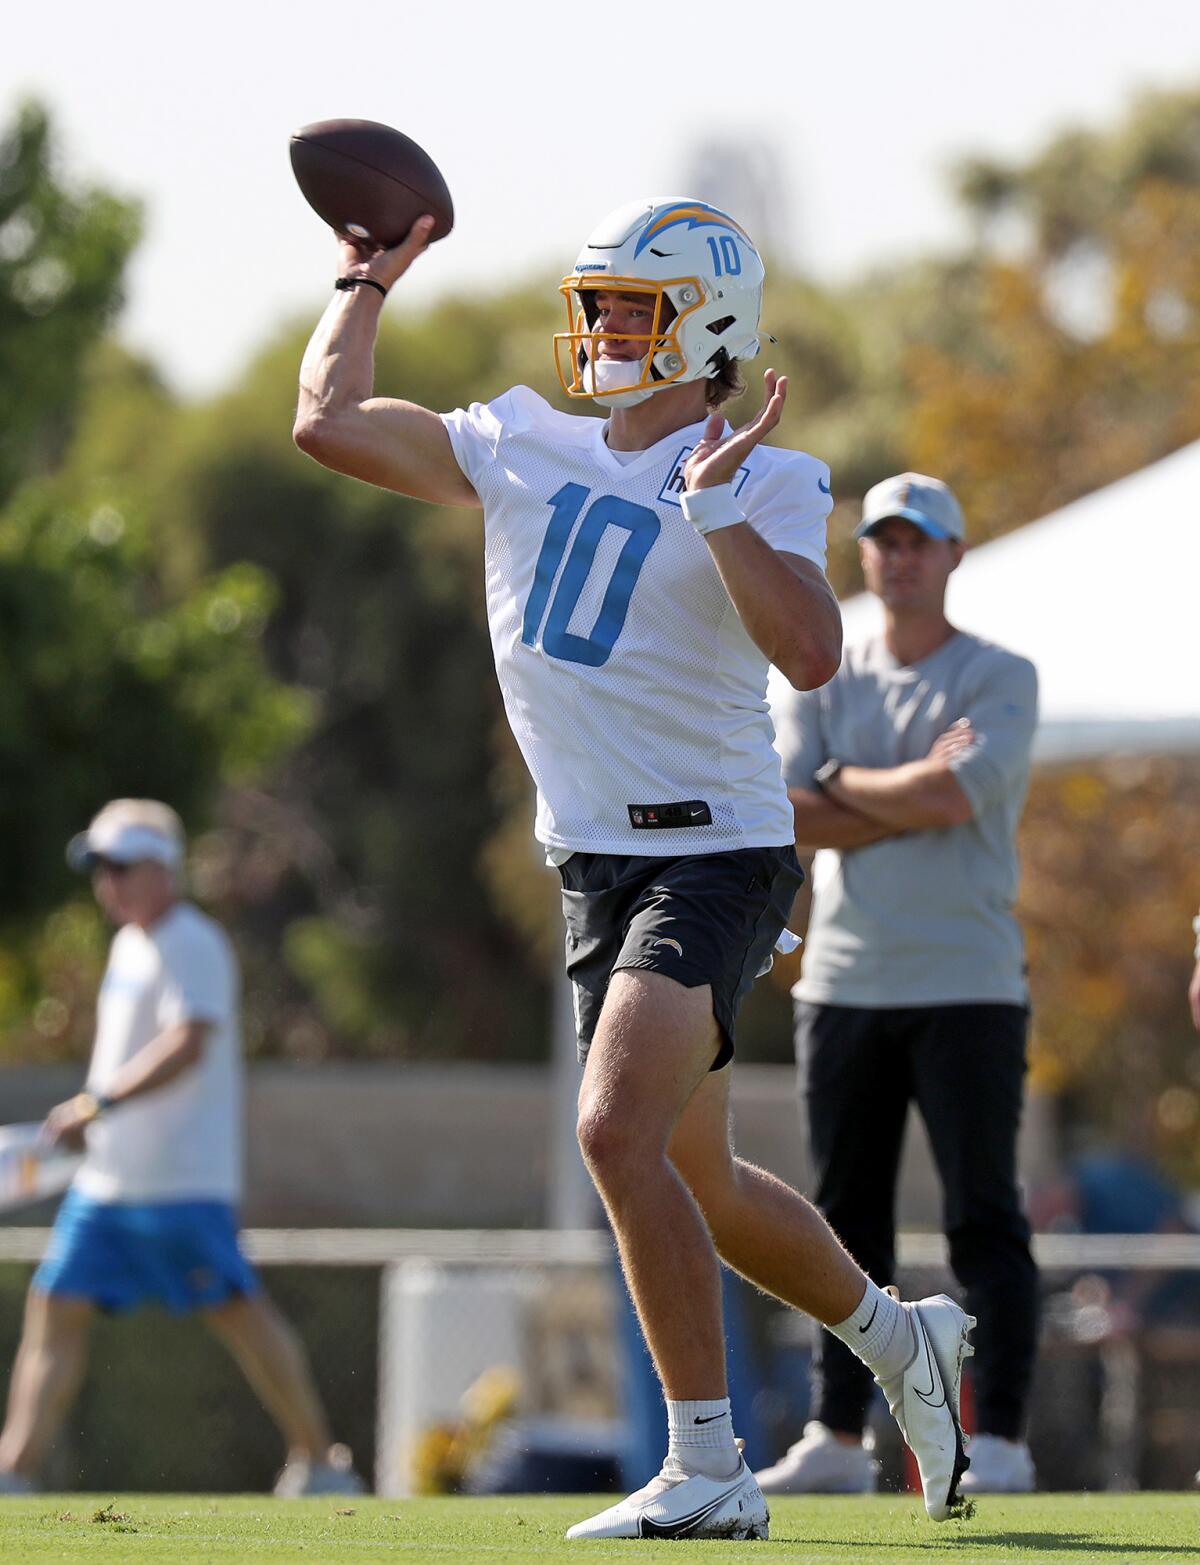 Los Angeles Chargers open training camp in Costa Mesa - Los Angeles Times